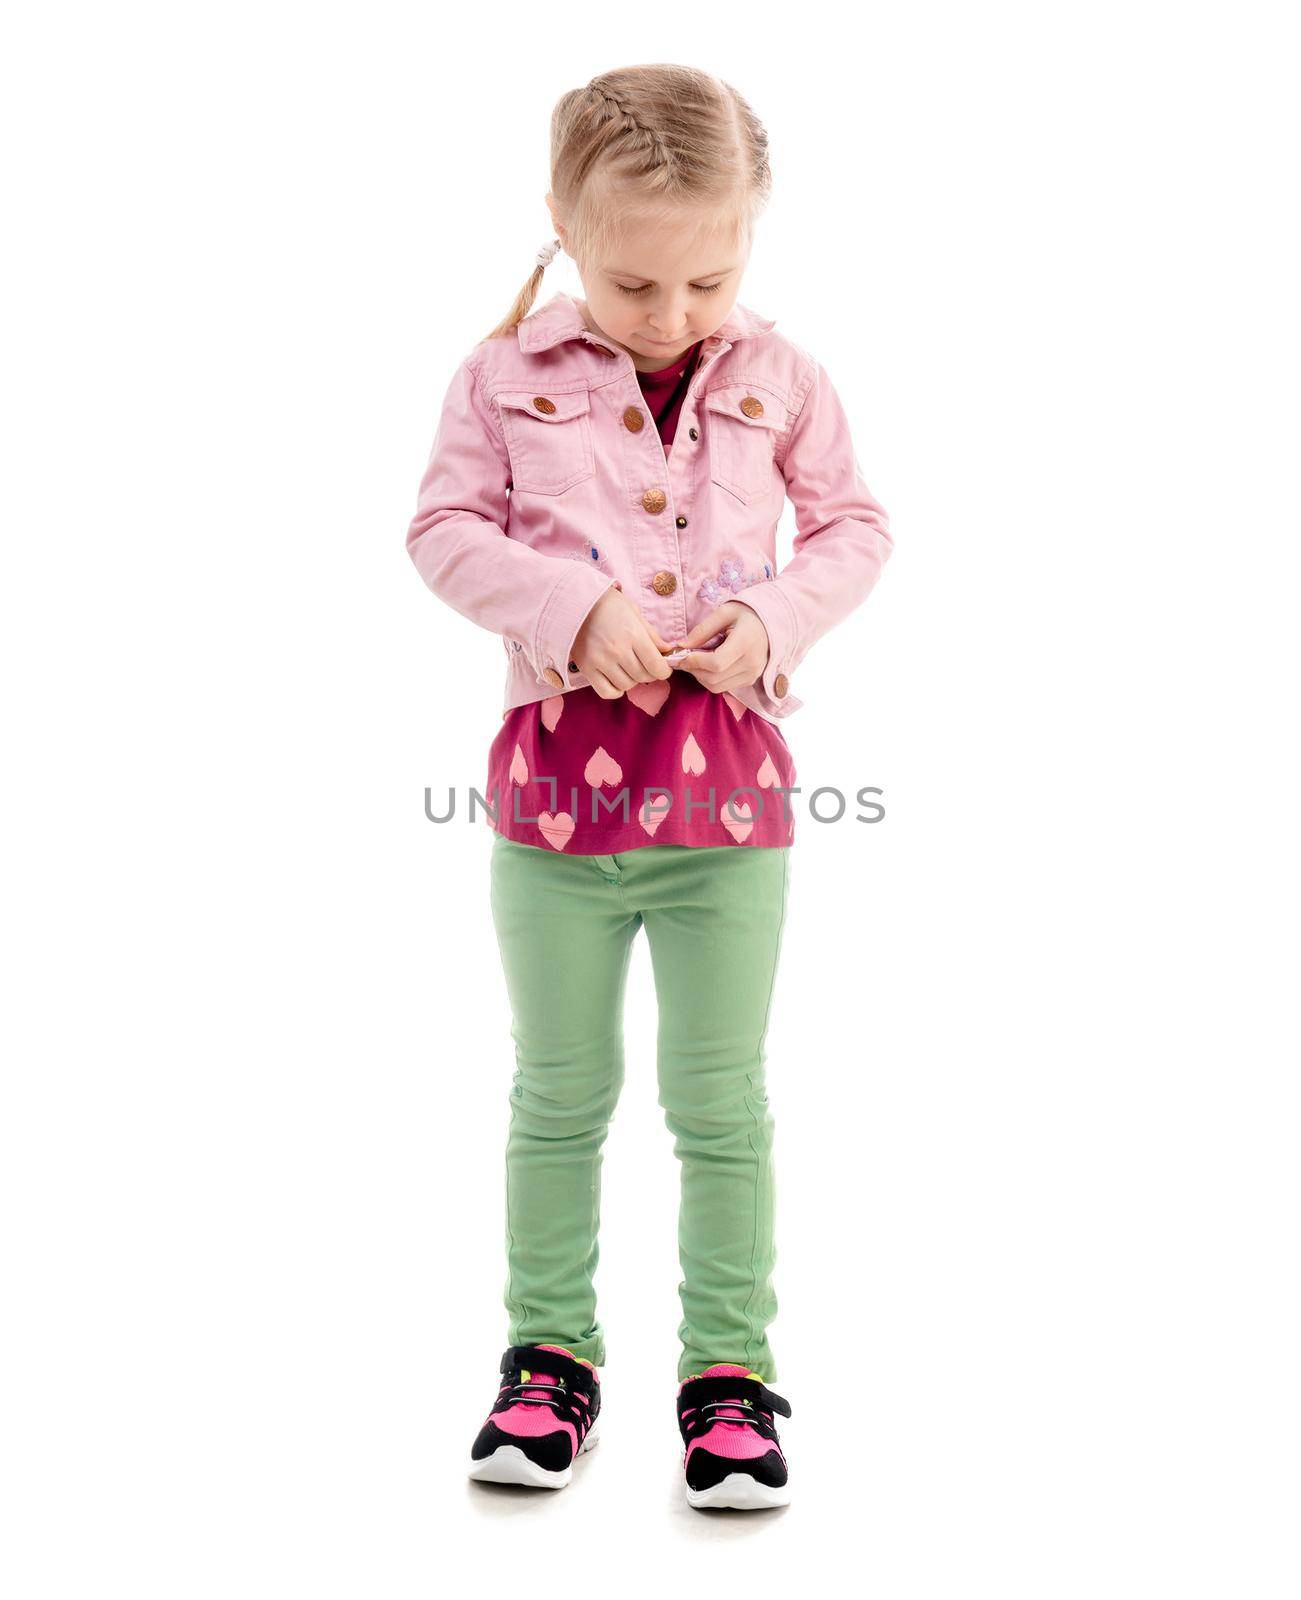 Child trying to zip her pink coat, isolated by tan4ikk1